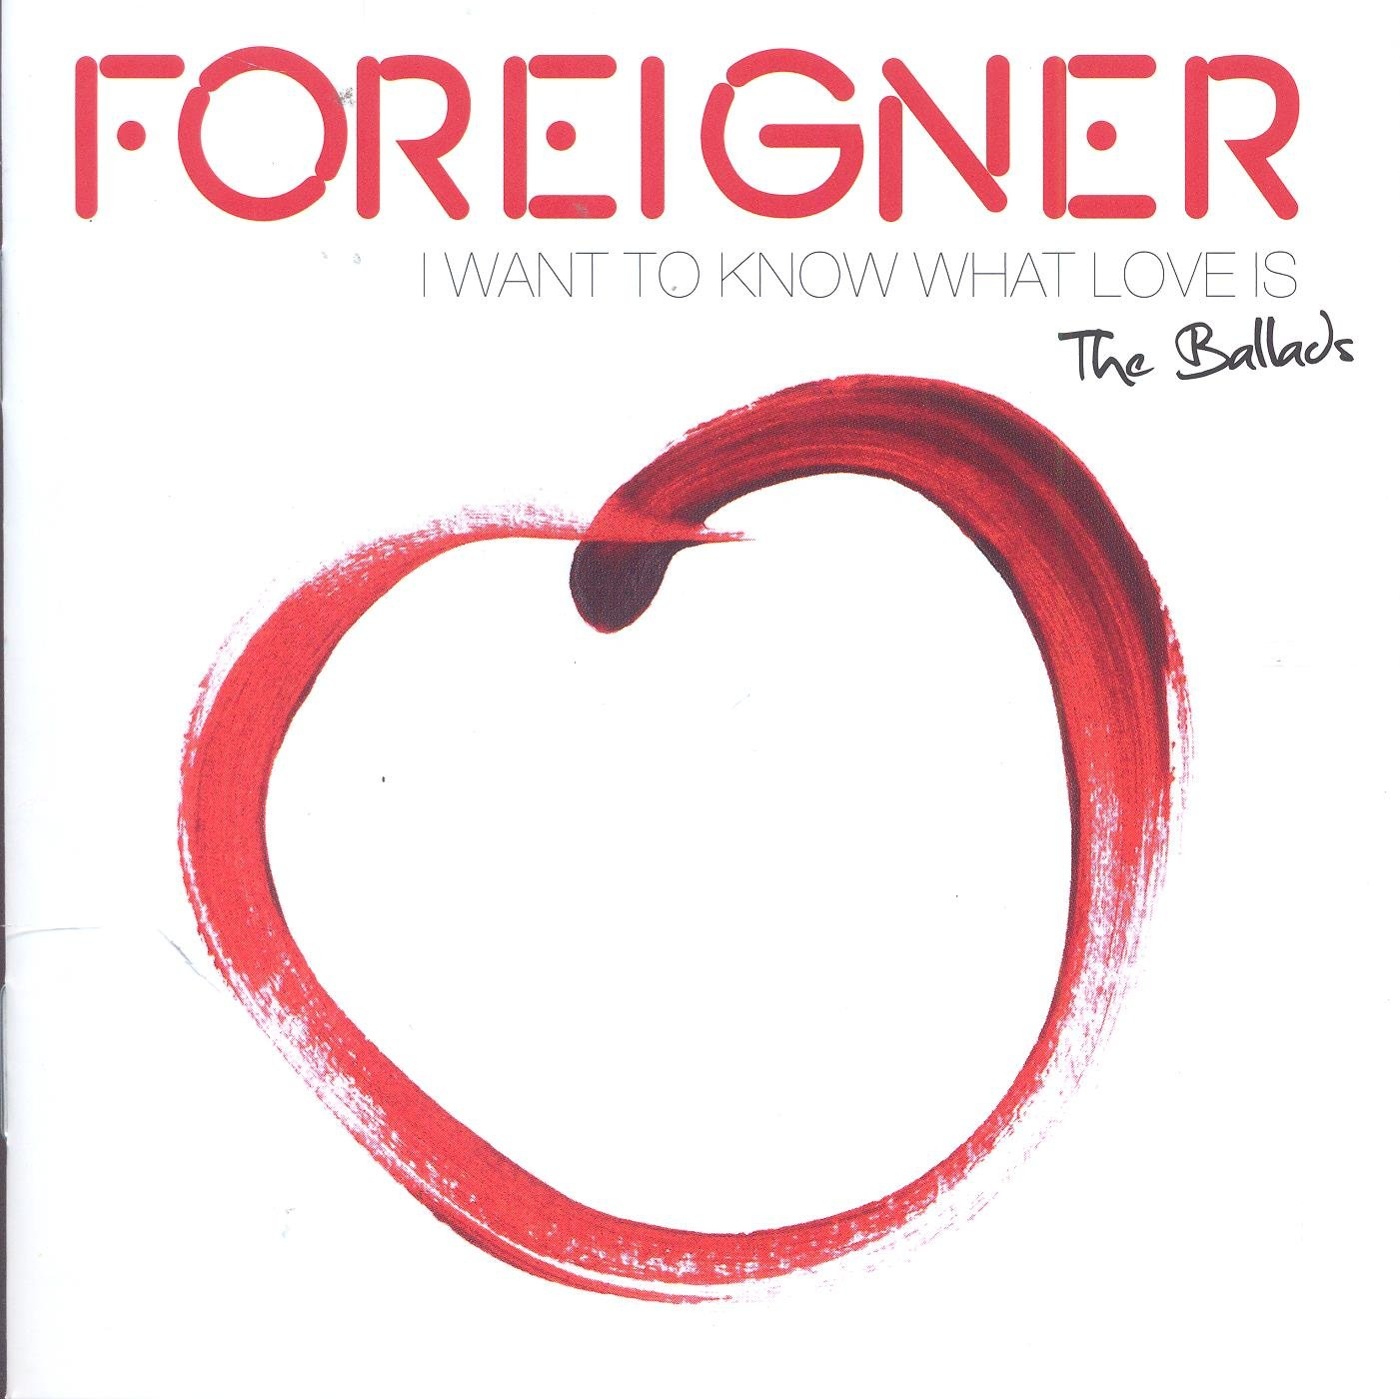 Baby girl i know what want. Foreigner - i want to know what Love is. Foreigner 1977. Foreigner - i want to know what Love is фото. I want to know.